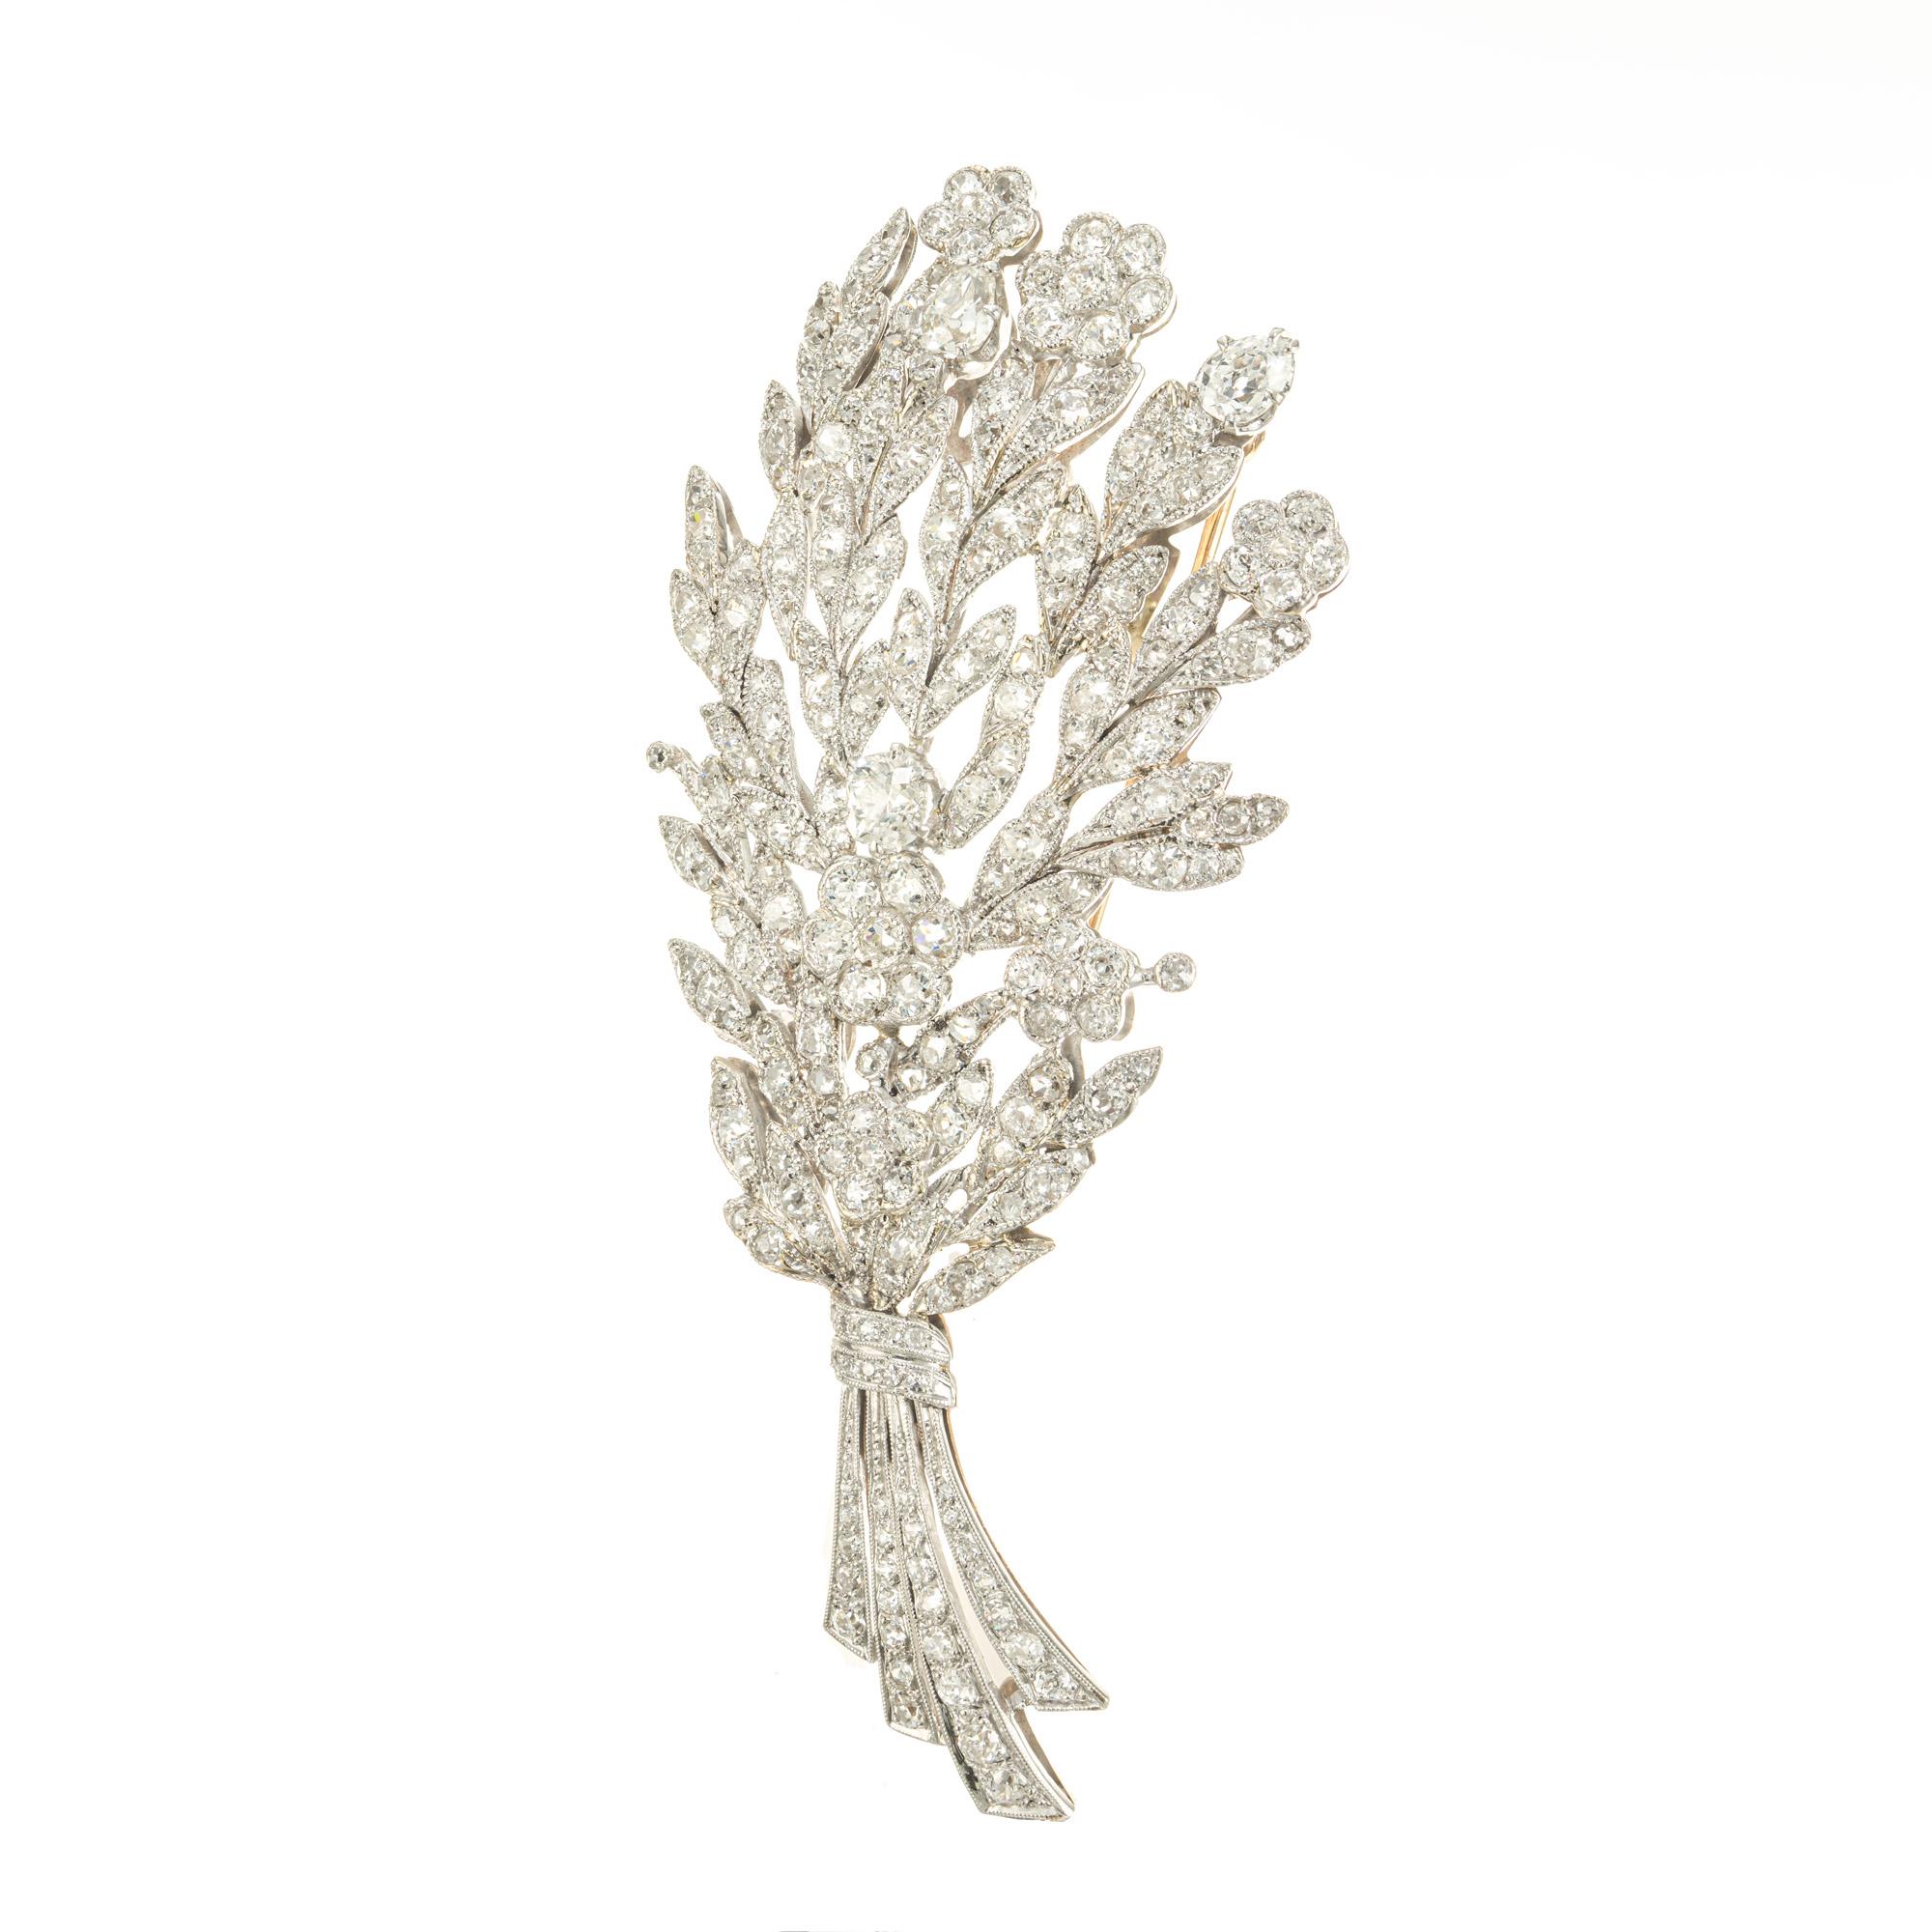 Circa 1910 wonderful diamond flower brooch. 1 round .42ct center diamond with 2 pear shaped diamonds totaling .90cts accented with 212 round diamonds, 5.30cts in a platinum flower design with 14k rose gold back frame and stem pin.  Intricate bead